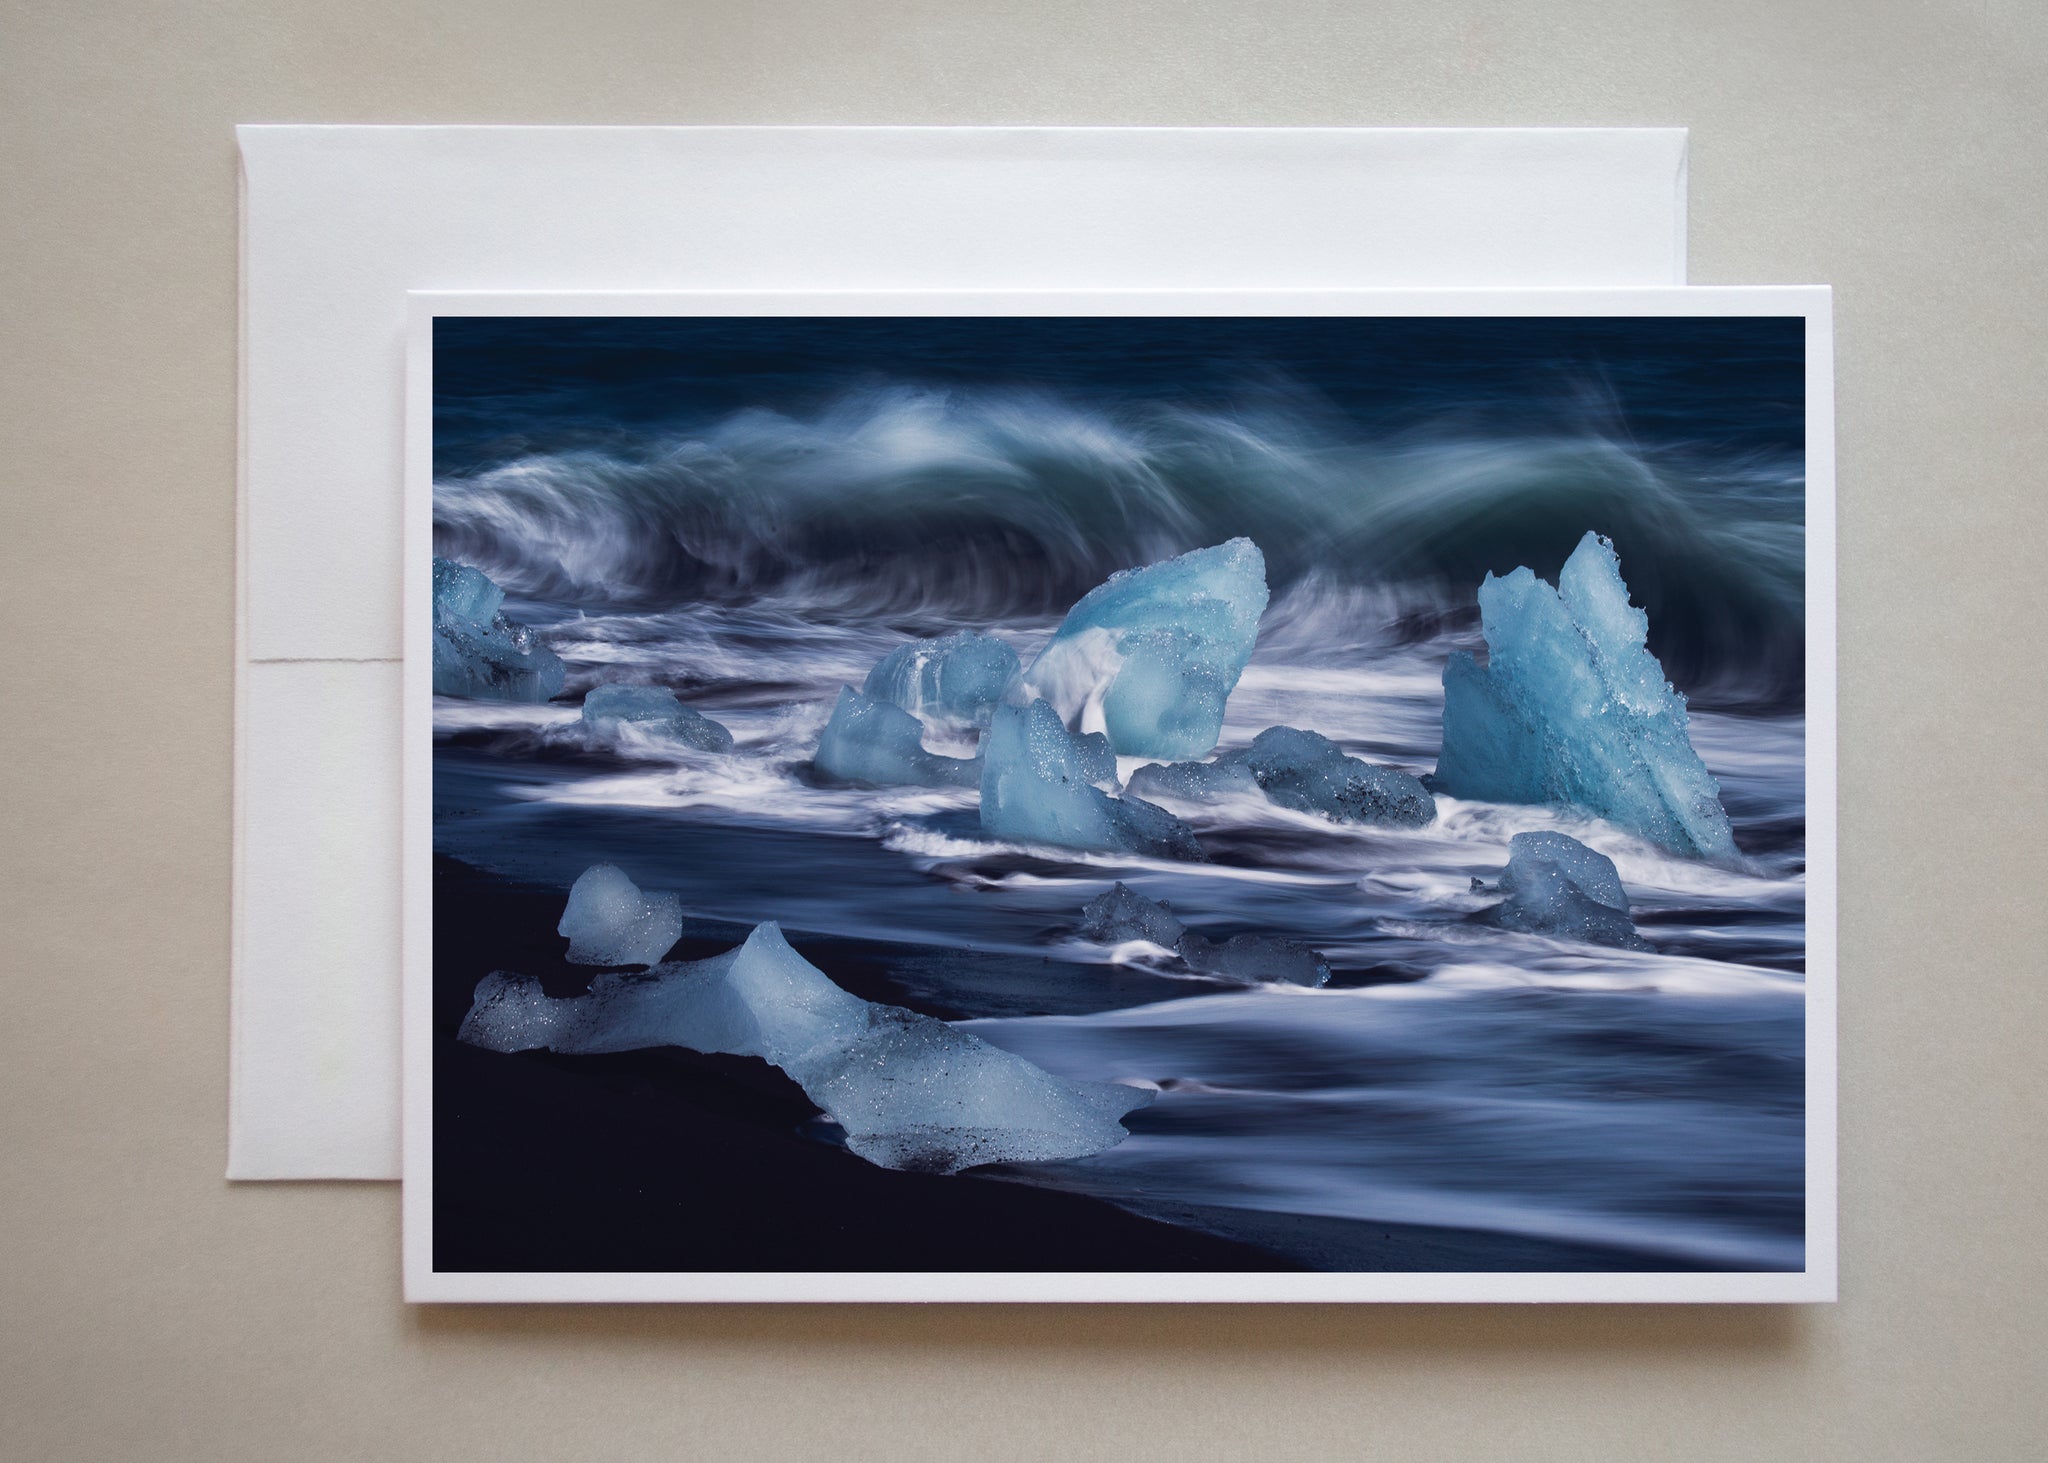 Photographer Alicia Campbell uses a long shutter speed to capture the blue, rolling waves in this icy beach greeting card.